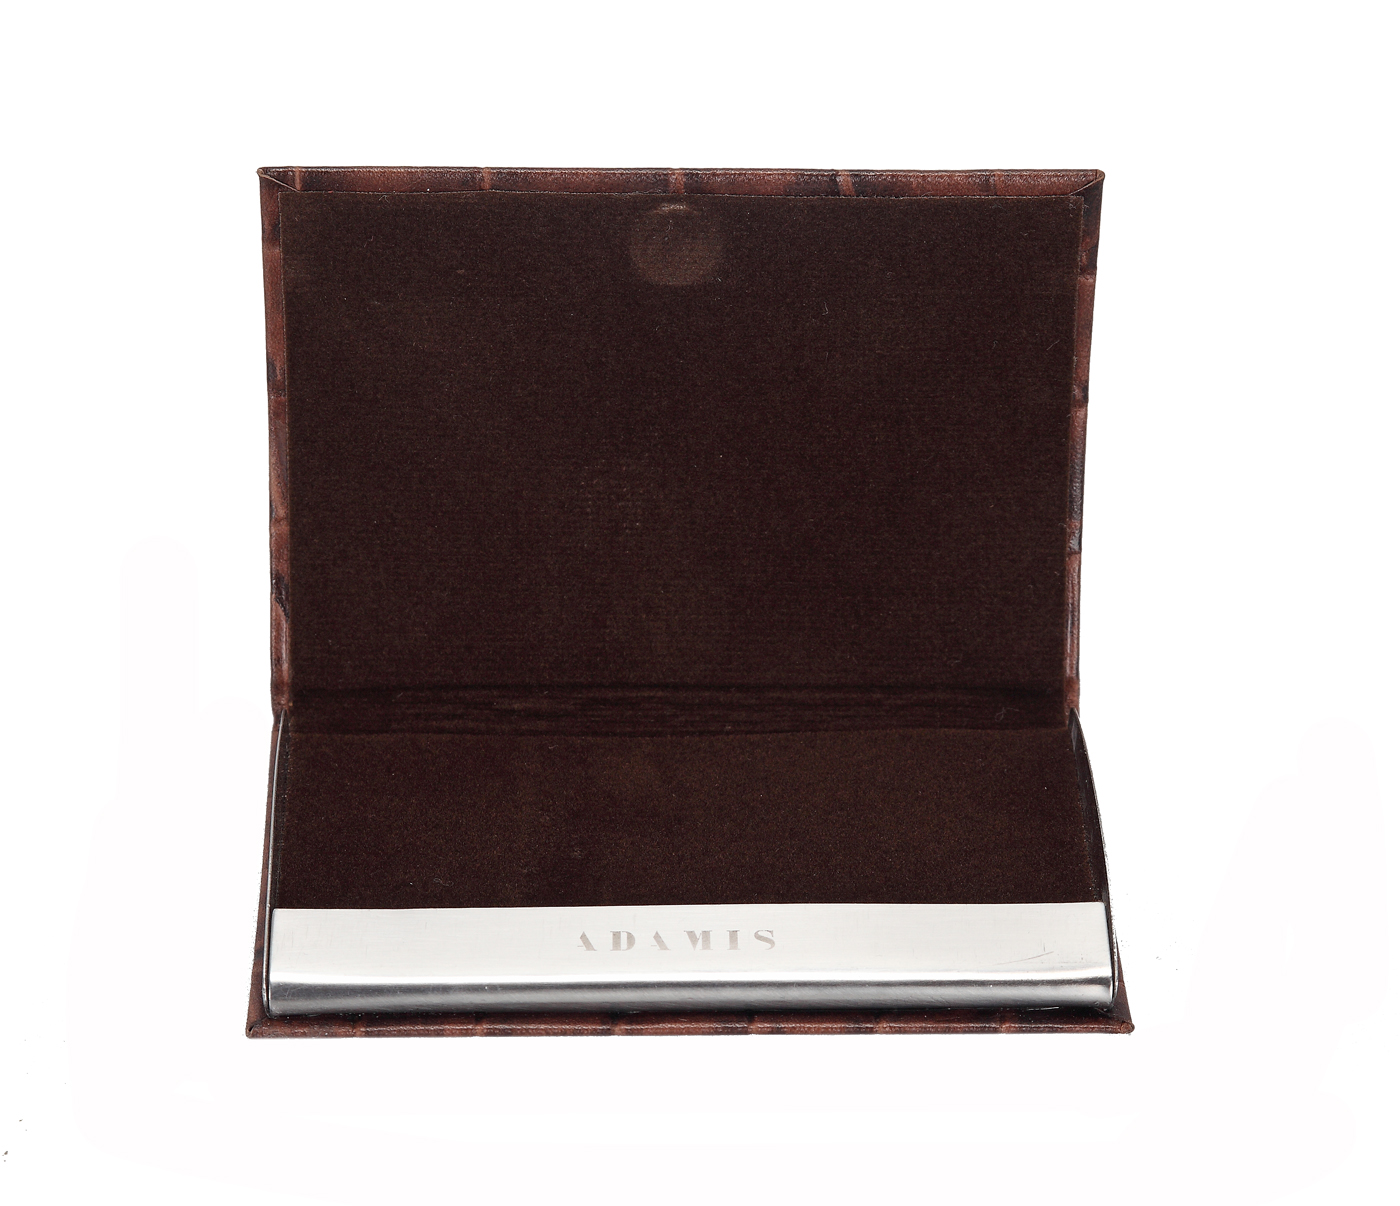 W170--Metal Body Credit, Visting Card Case Bounded In Genuine Leather - Brown.